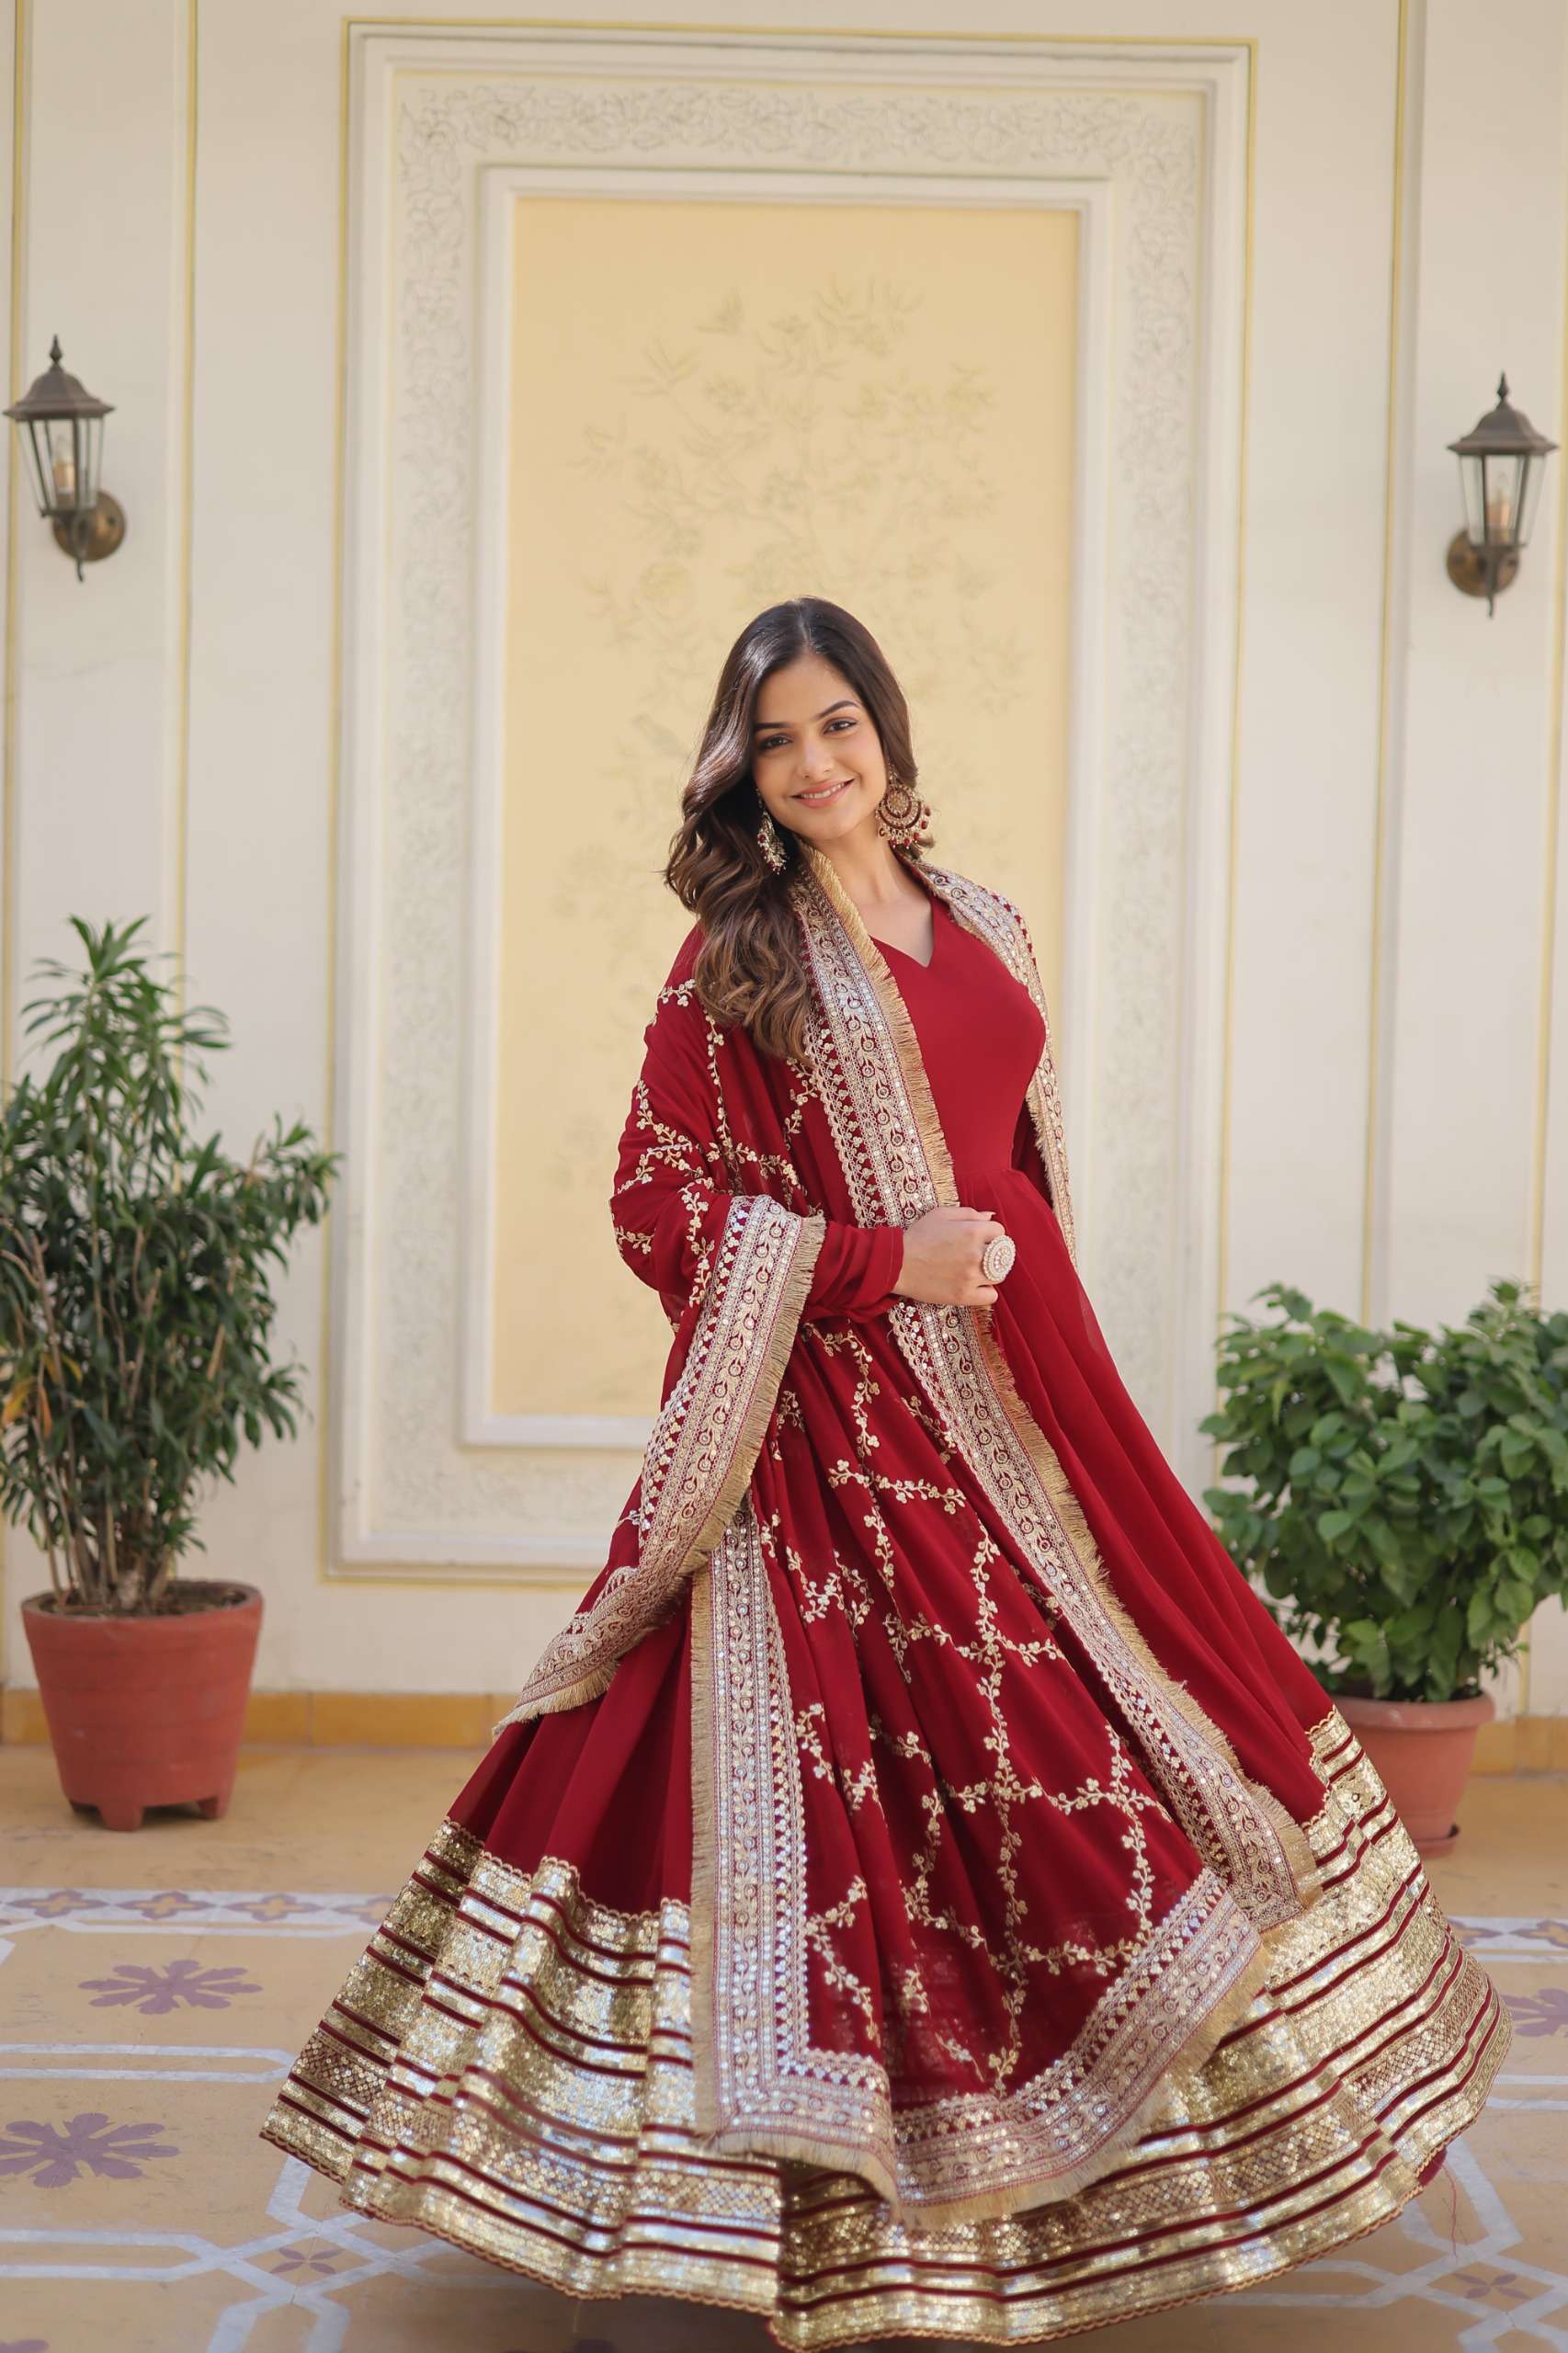 TRADITIONAL RED COLOUR  Faux Blooming with Embroidery Zari Sequins-work LONG ANARKALI STYLE FESTIVAL SPECIAL READYMADE SUITS COLLECITON AT BEST RATE